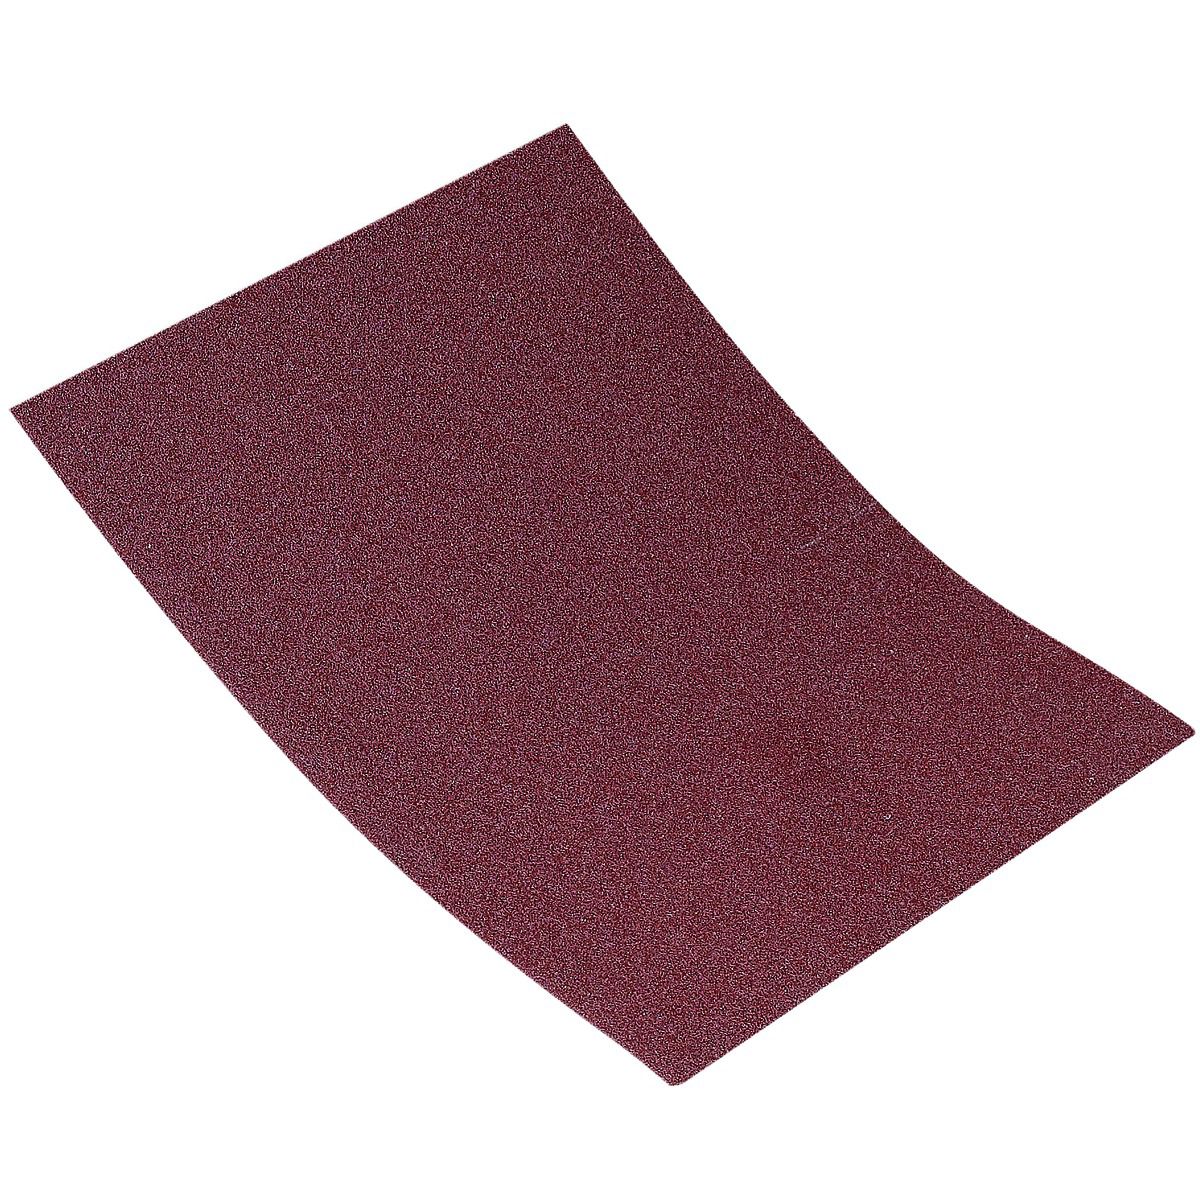 Image of Wickes Aluminium Oxide Cloth-Backed Assorted Sandpaper Sheets - Pack of 3